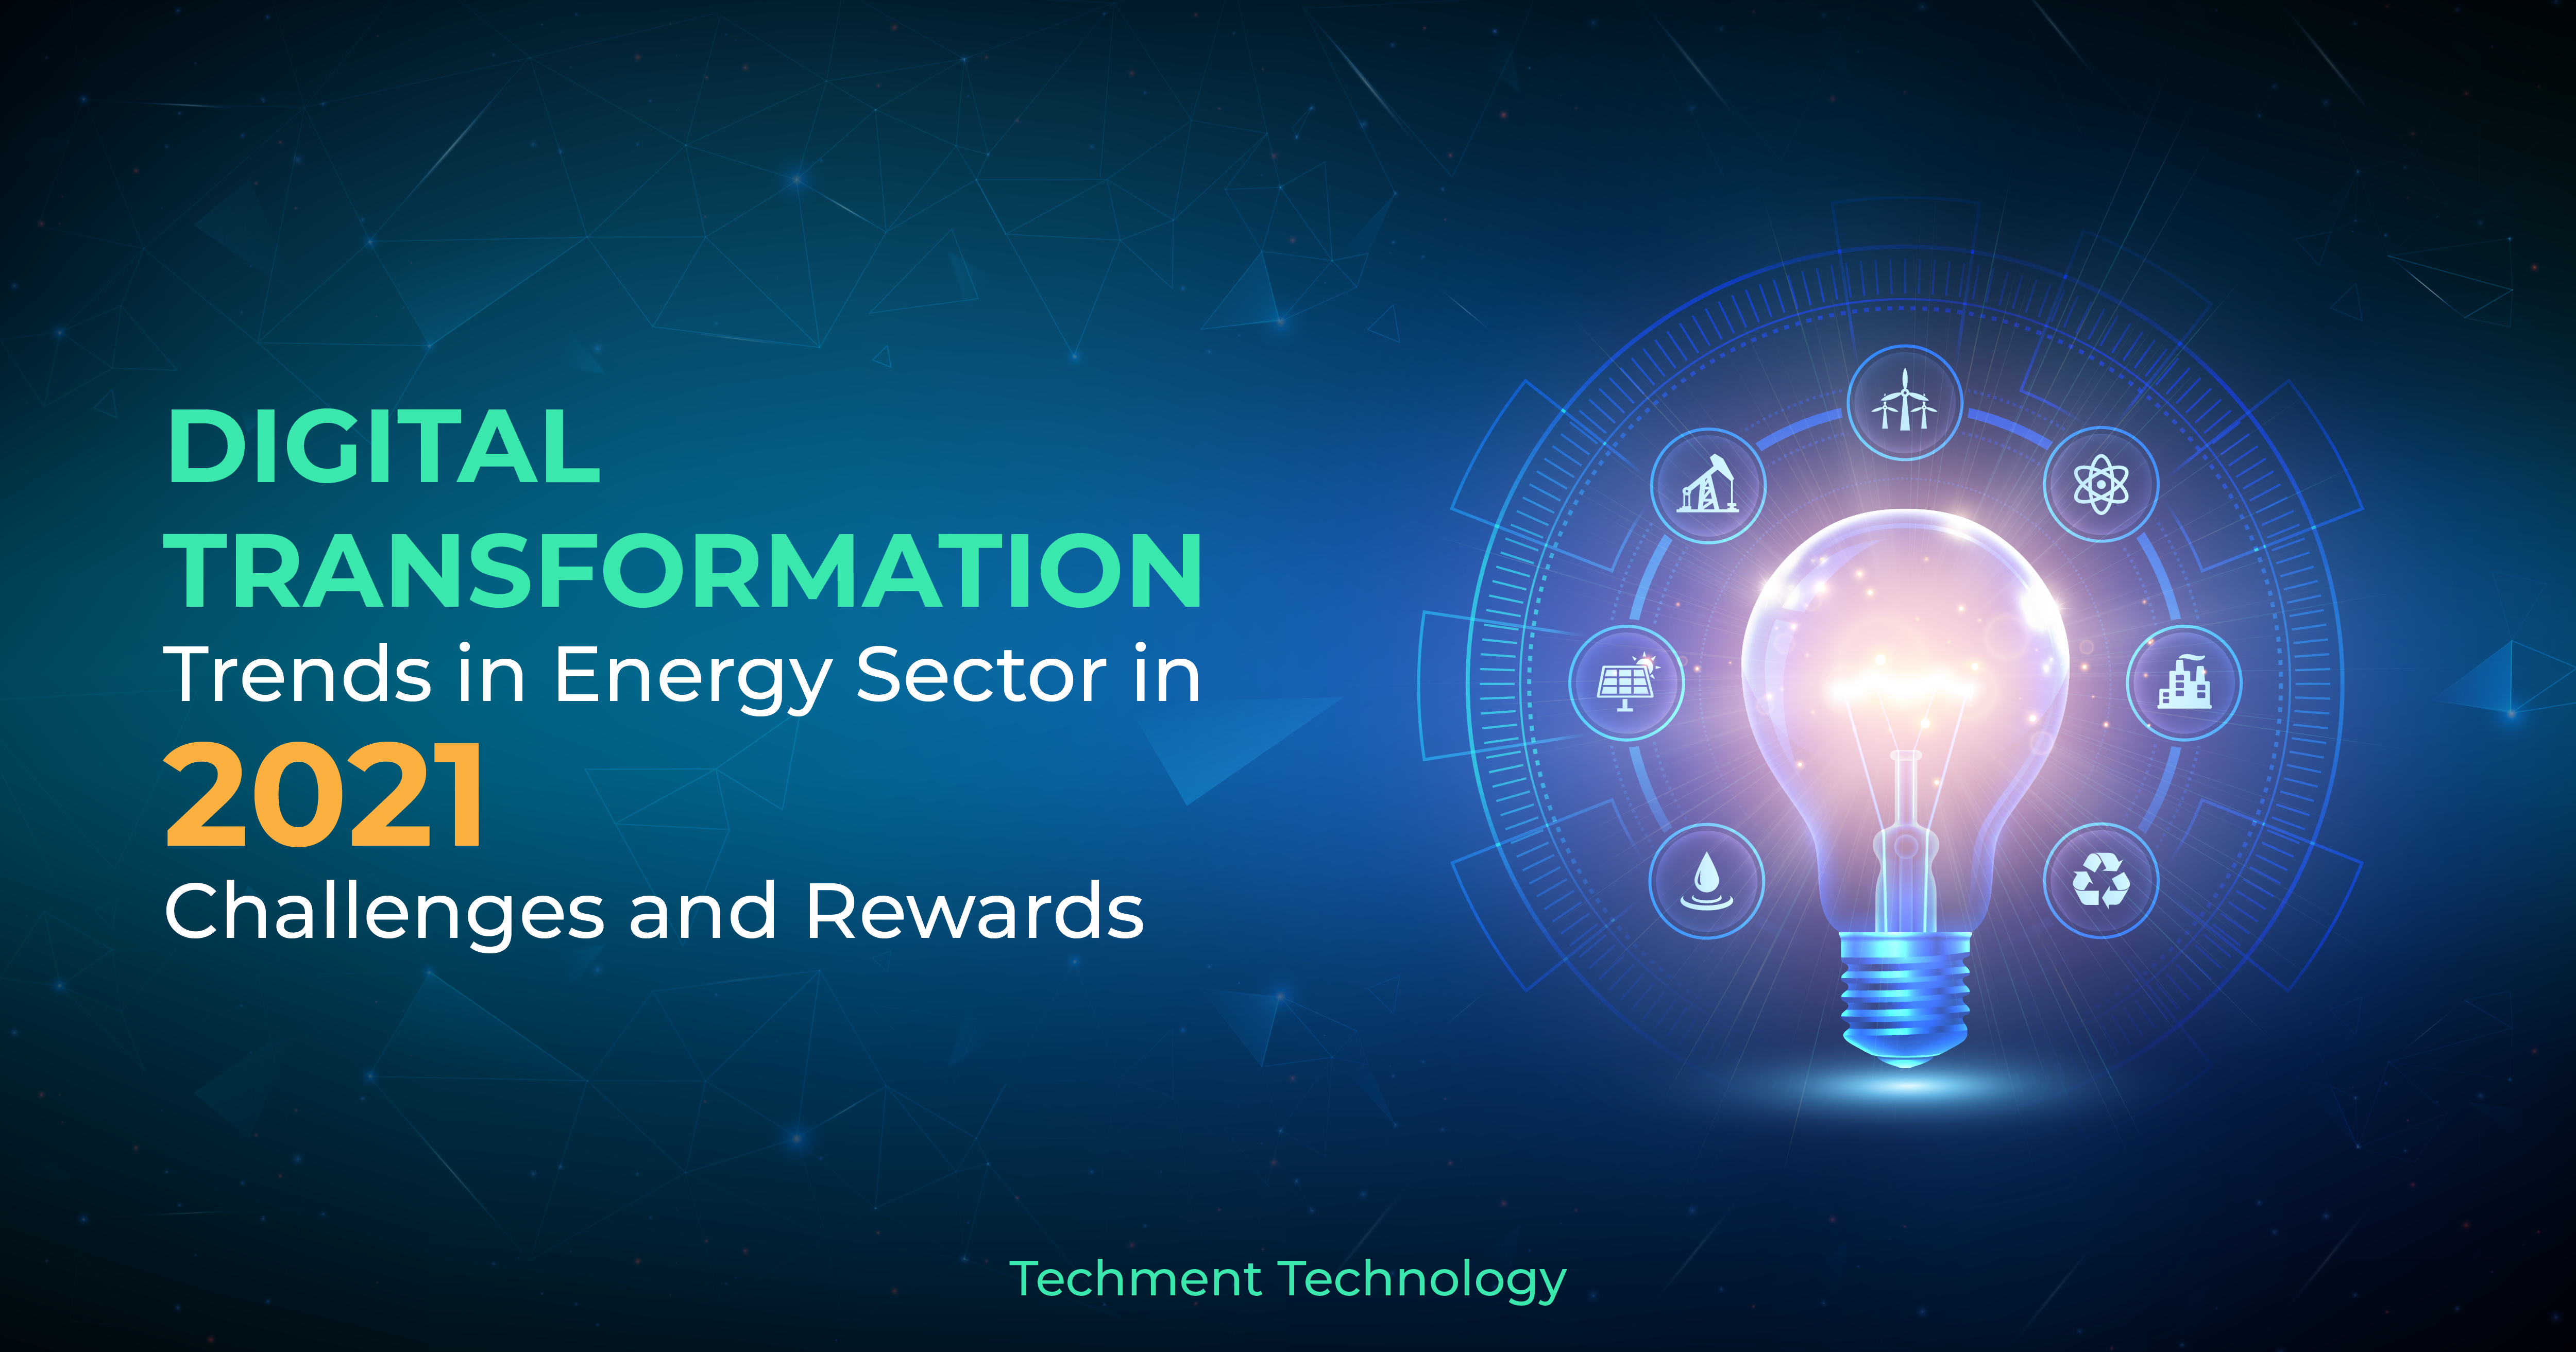 Digital Transformation Trends in Energy Sector in 2021 - Challenges and Rewards